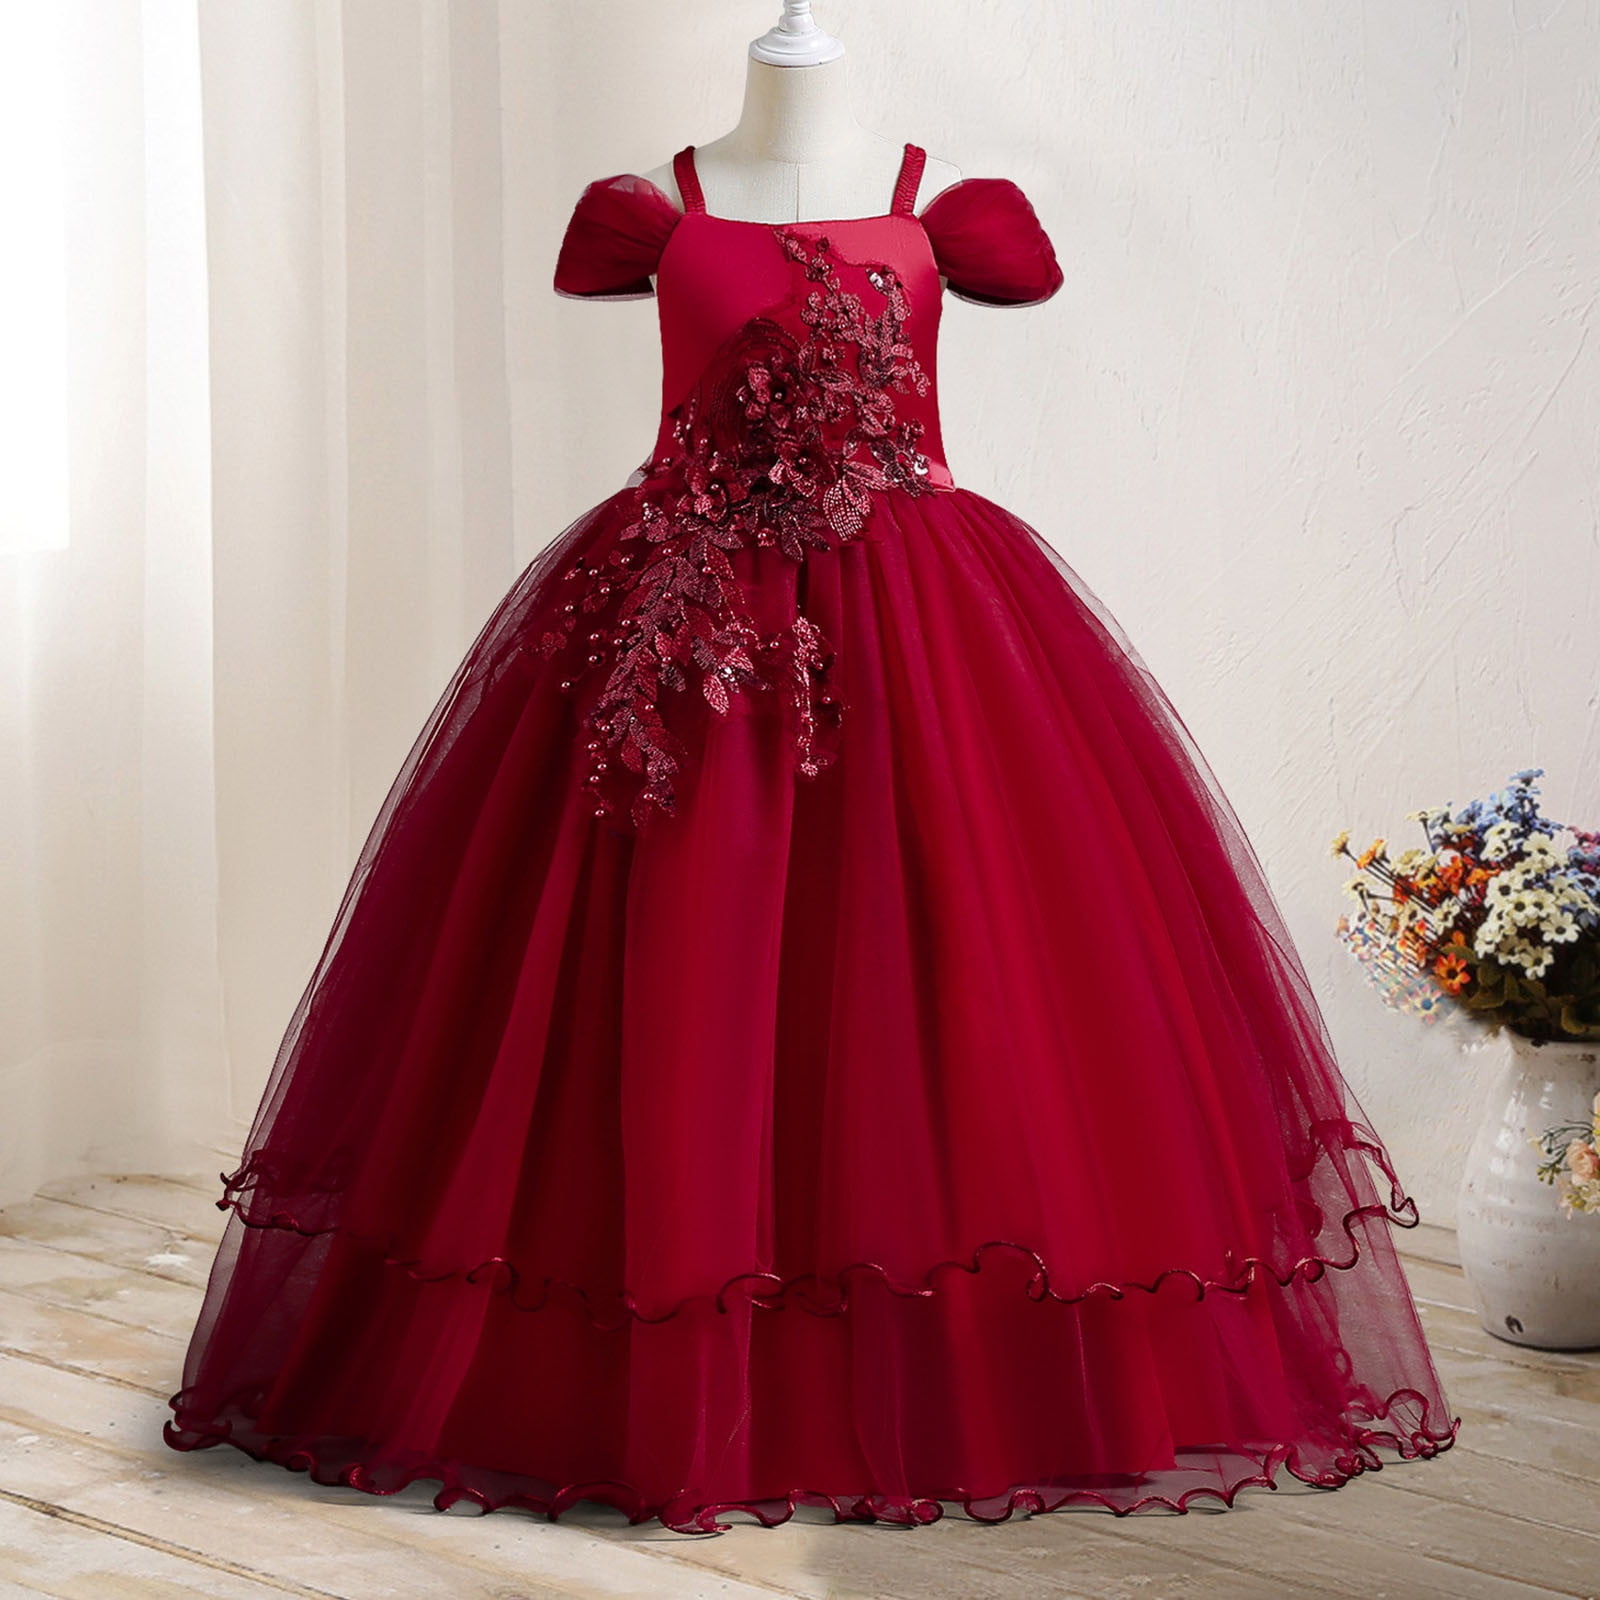 10 Most Attractive First Birthday Baby Girl Dresses for All Seasons